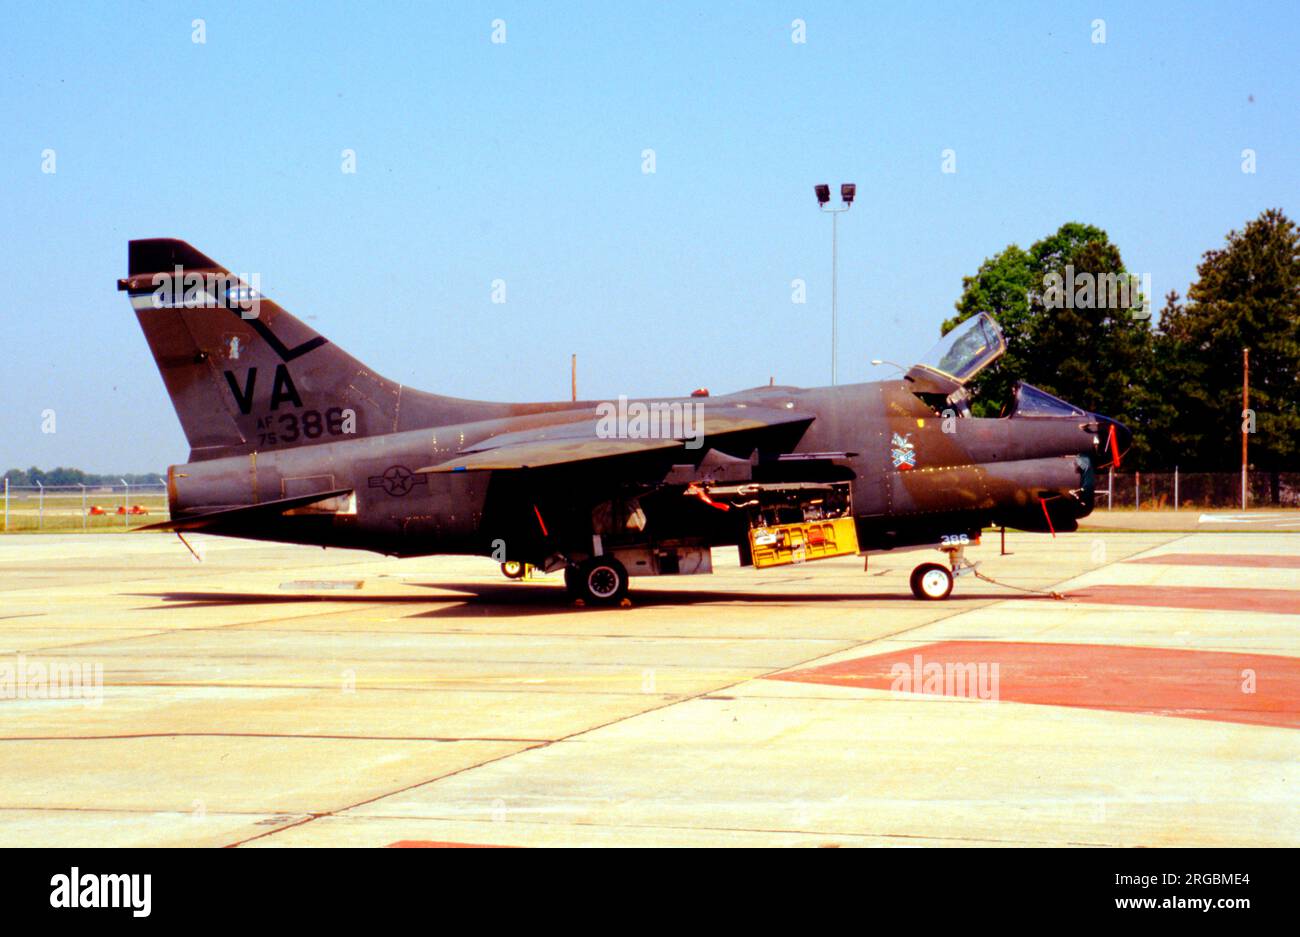 United States Air Force (USAF) - Ling-Temco-Vought A-7D-17-CV Corsair II 75-0386 (msn D-436), of the 149th Tactical Fighter Squadron, Virginia Air National Guard. Stock Photo